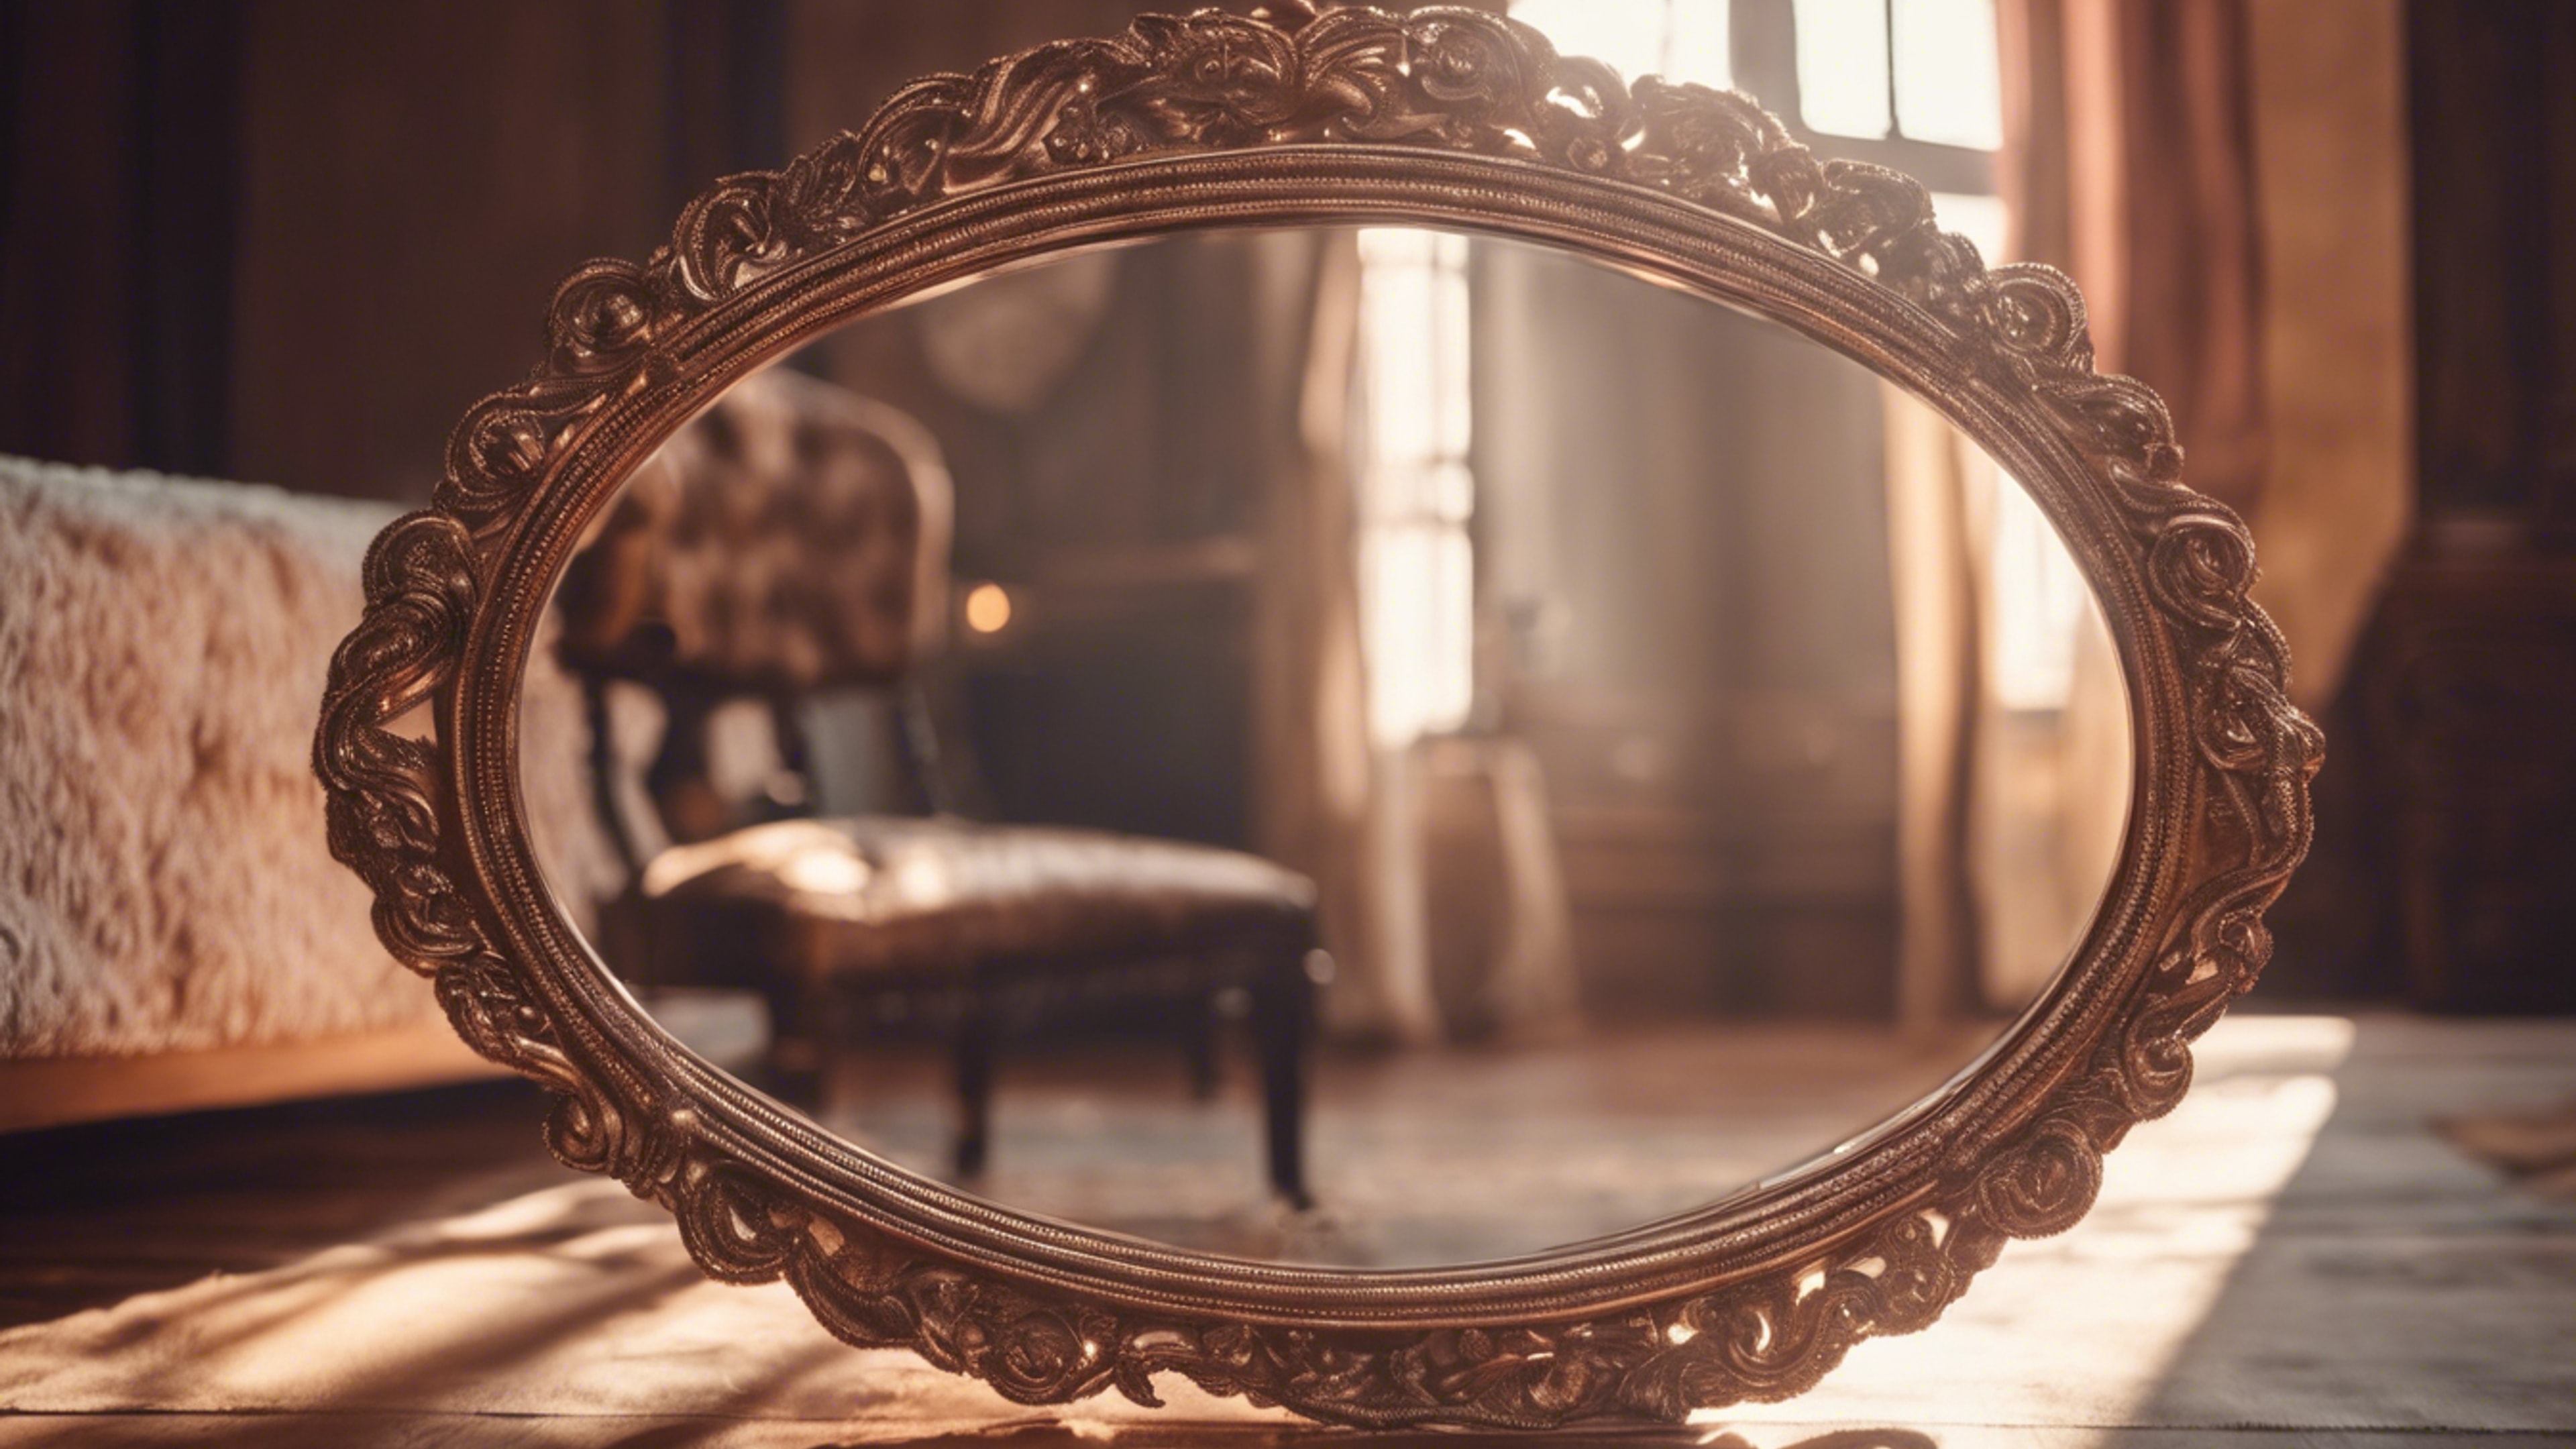 An antique rose gold mirror reflecting a sunlit, vintage-inspired room. 墙纸[df758999a7b143f09983]